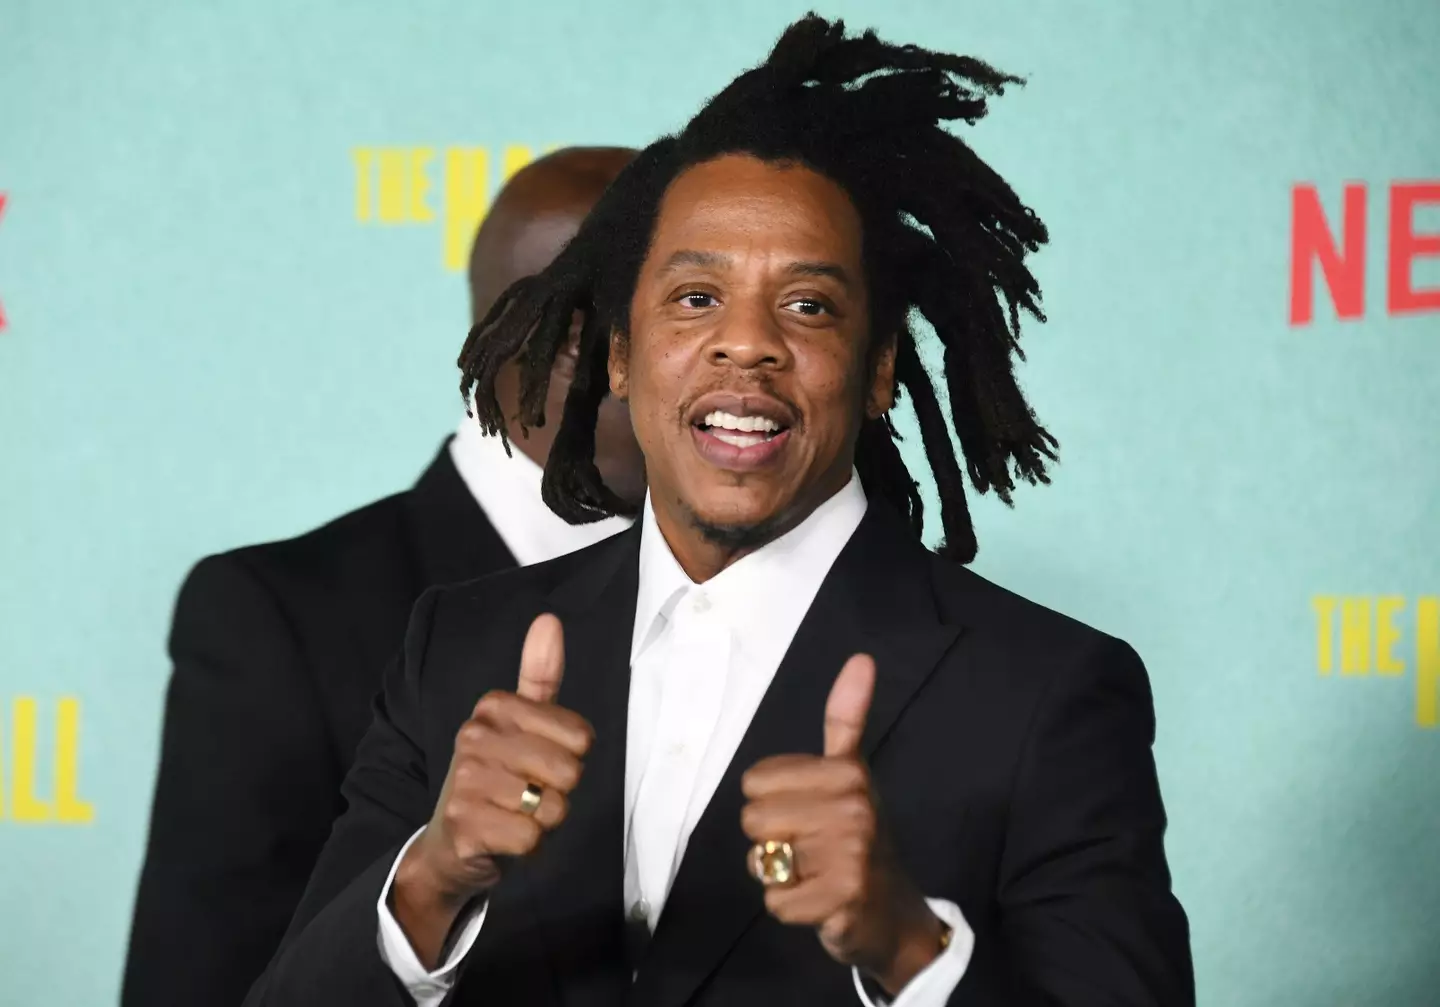 Jay-Z was given the title of 'hip-hop's first billionaire' back in 2019.